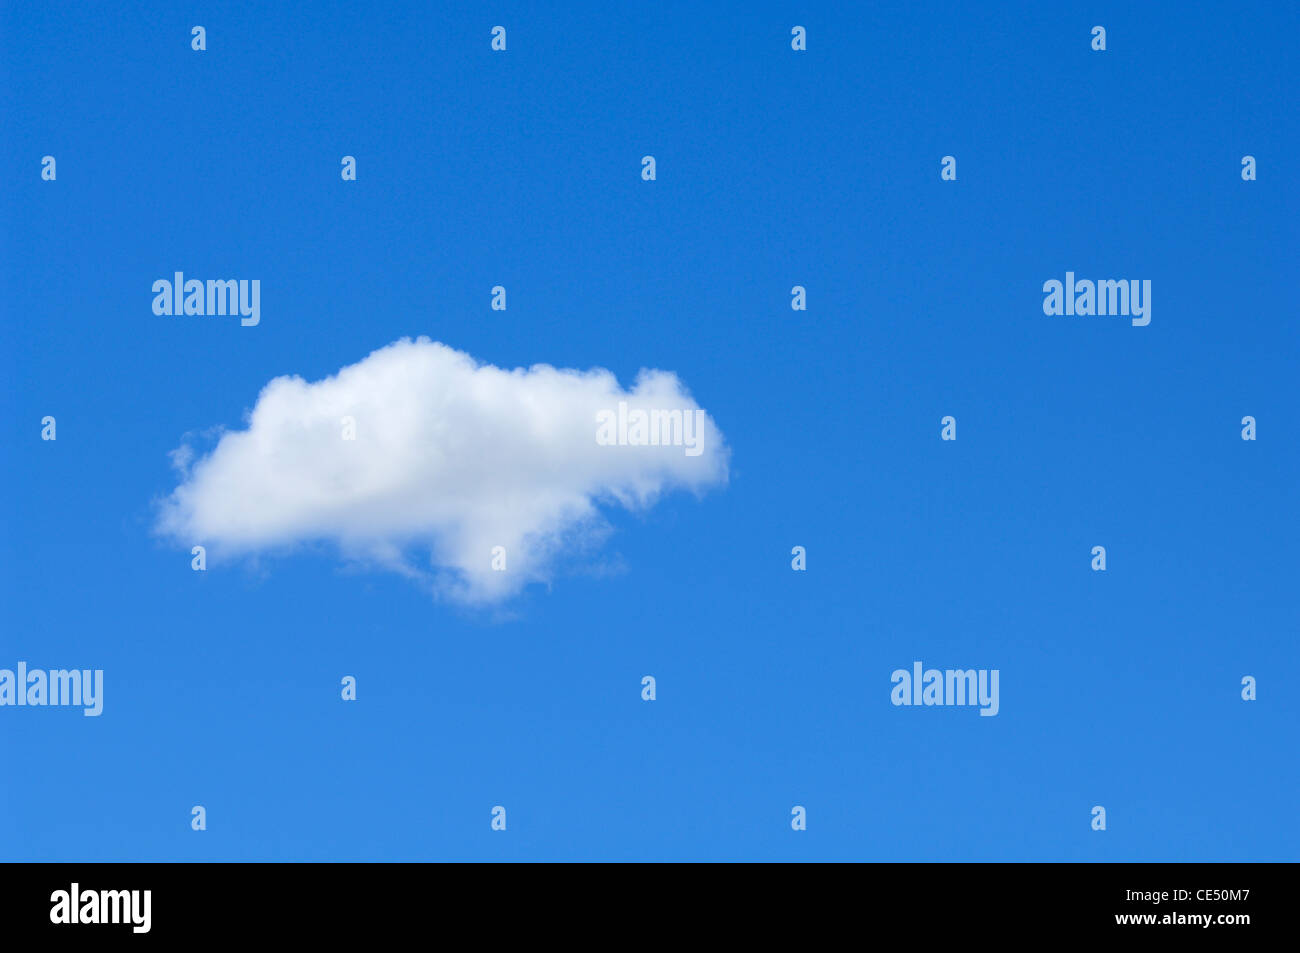 A single while cloud against a clear blue sky with copyspace. Stock Photo